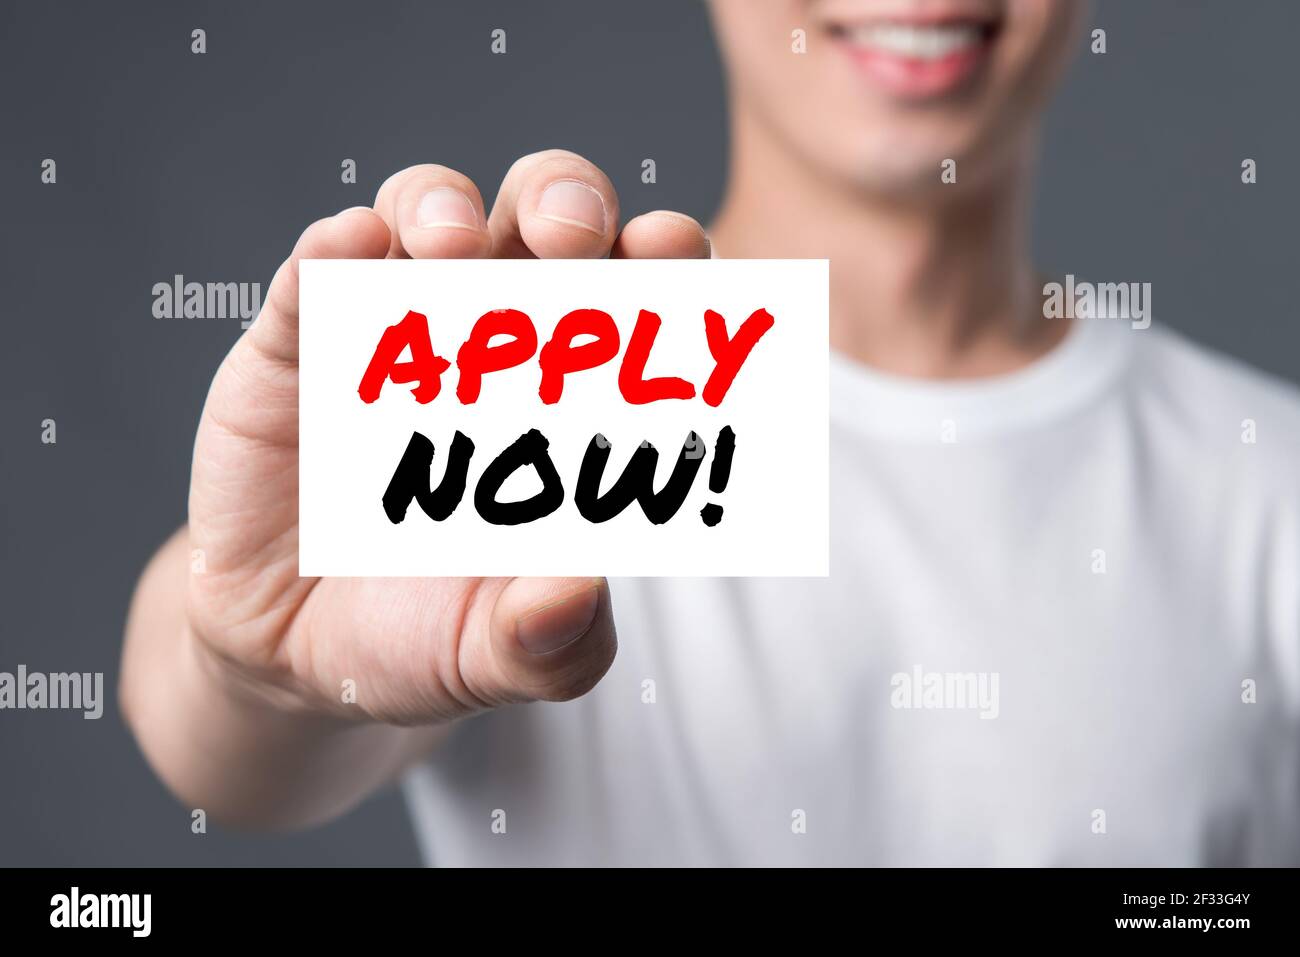 APPLY NOW! message on the card shown by a man Stock Photo